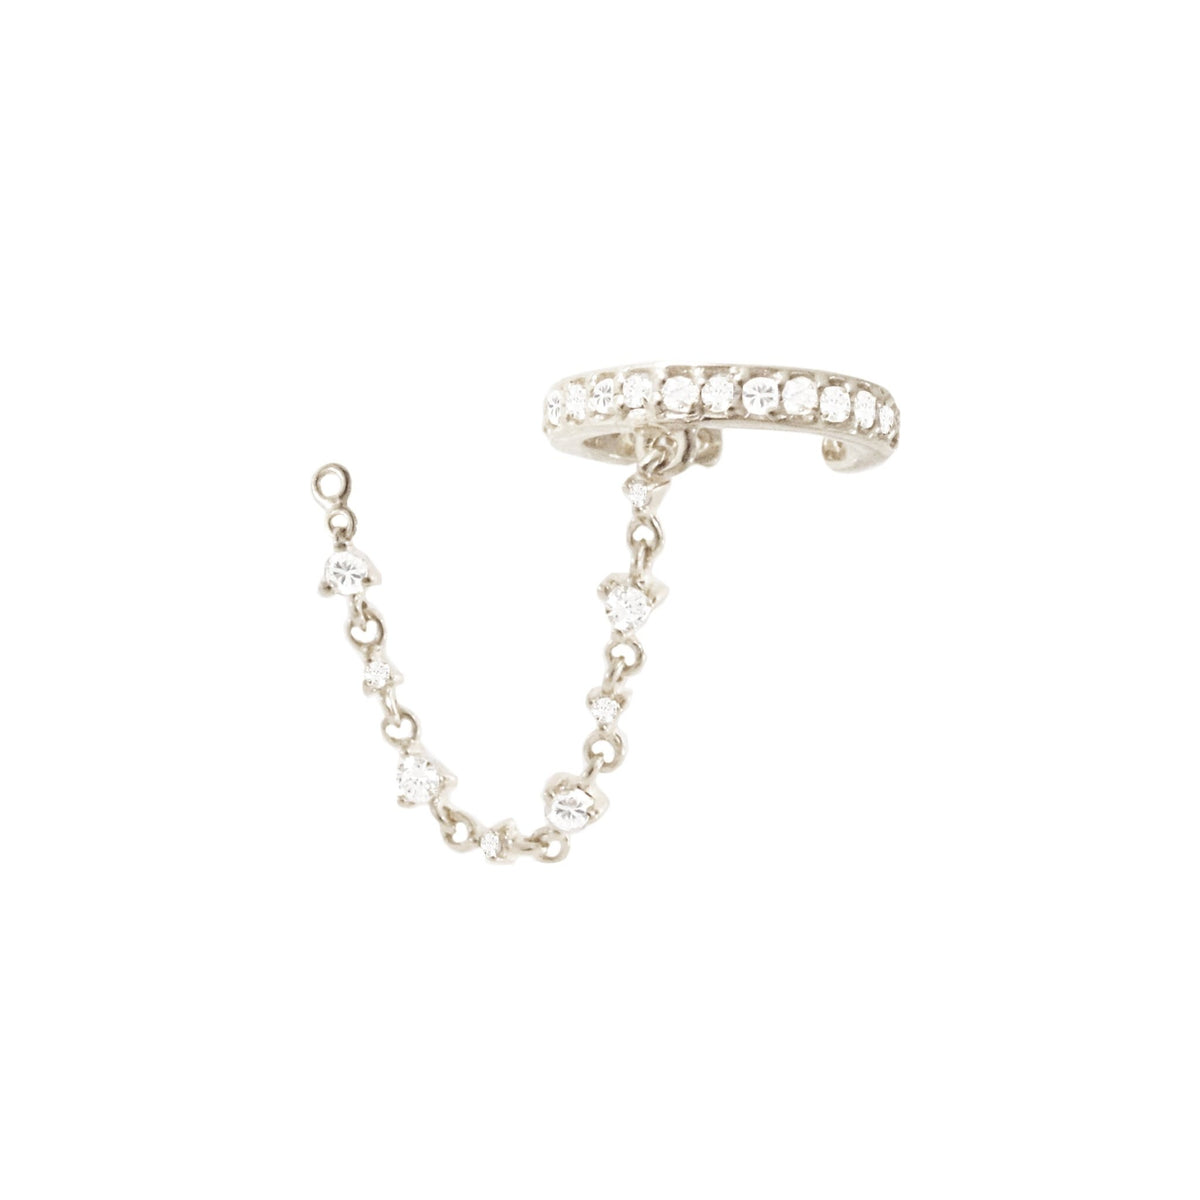 SCATTERED LOVE CHAIN EAR CUFF - CUBIC ZIRCONIA &amp; SILVER - SO PRETTY CARA COTTER